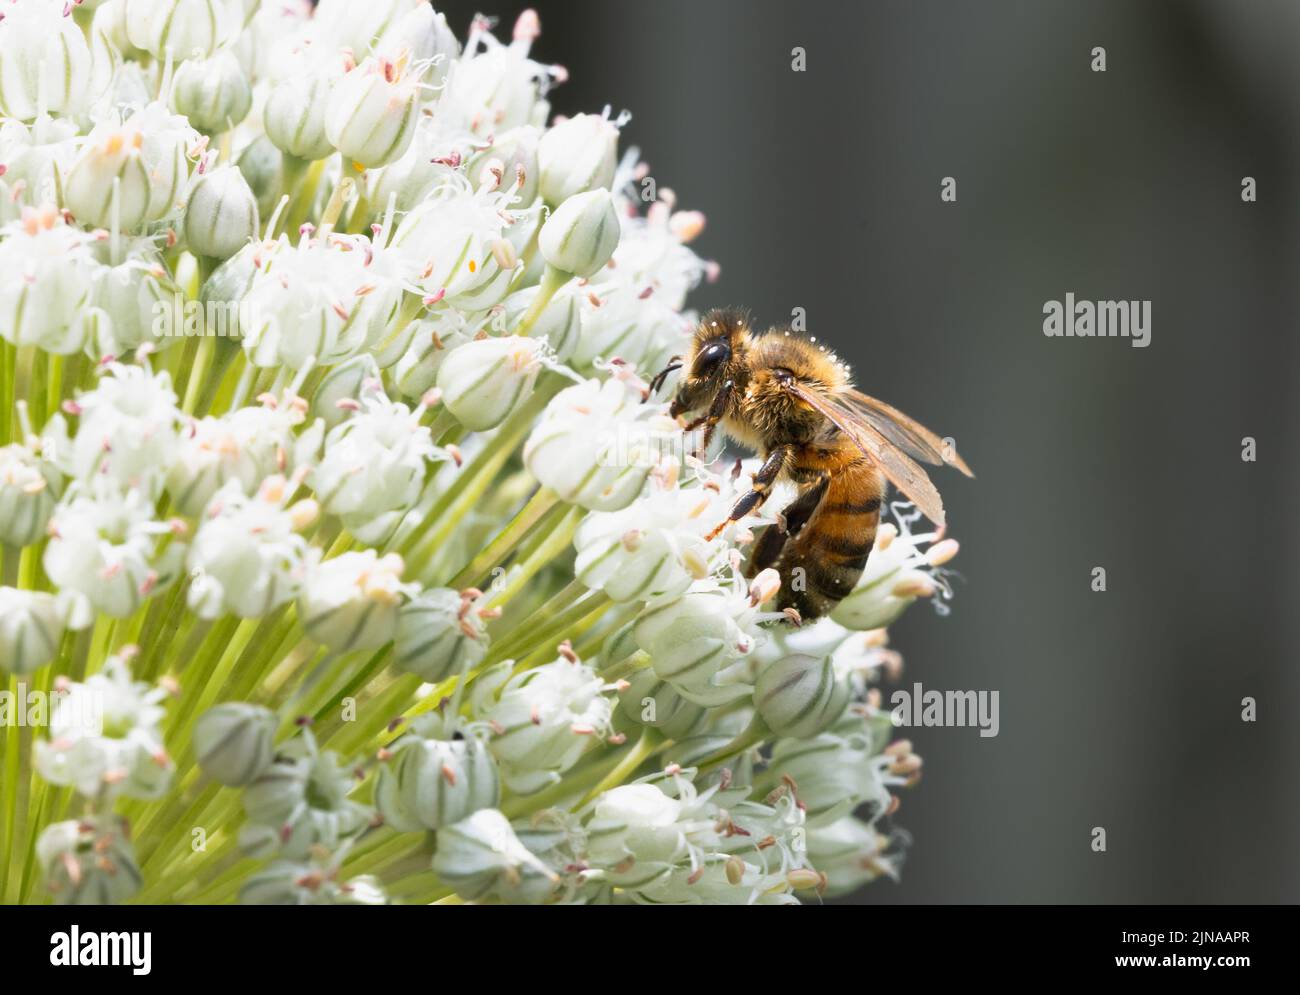 Honey Bee collecting nectar and pollen from a white allium flower Stock Photo